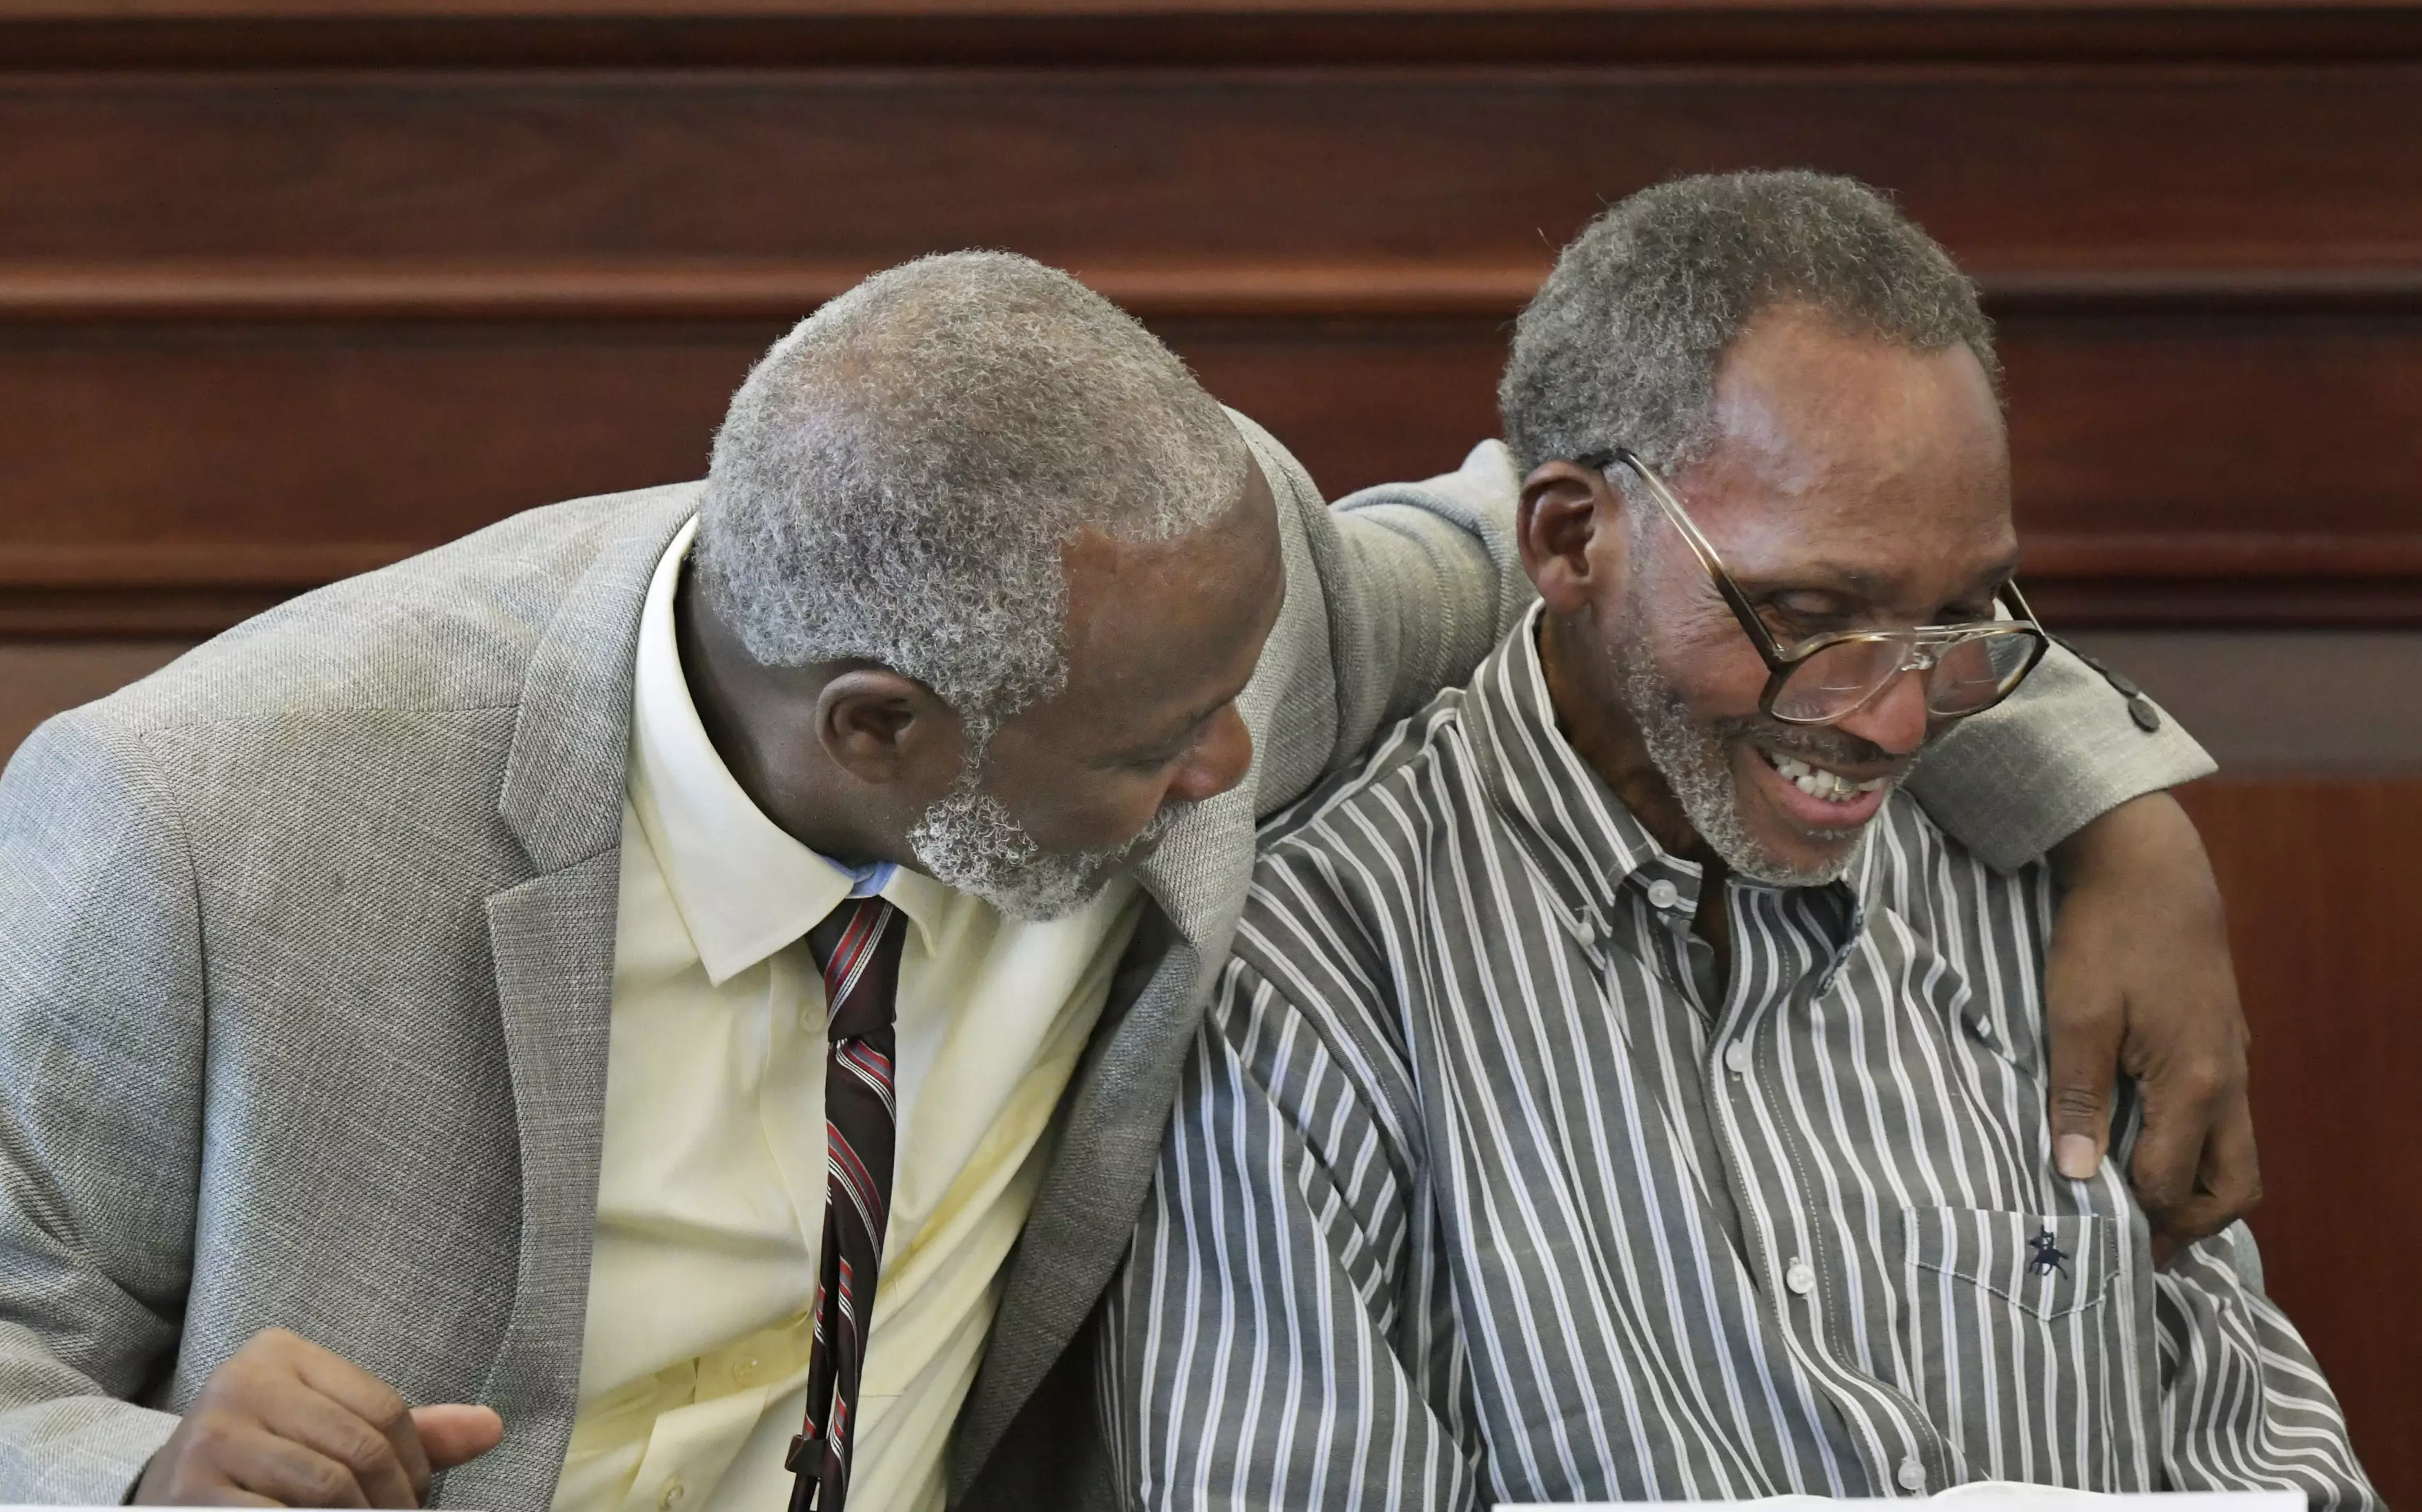 The two men were finally set free after having spent 42 years behind bars.